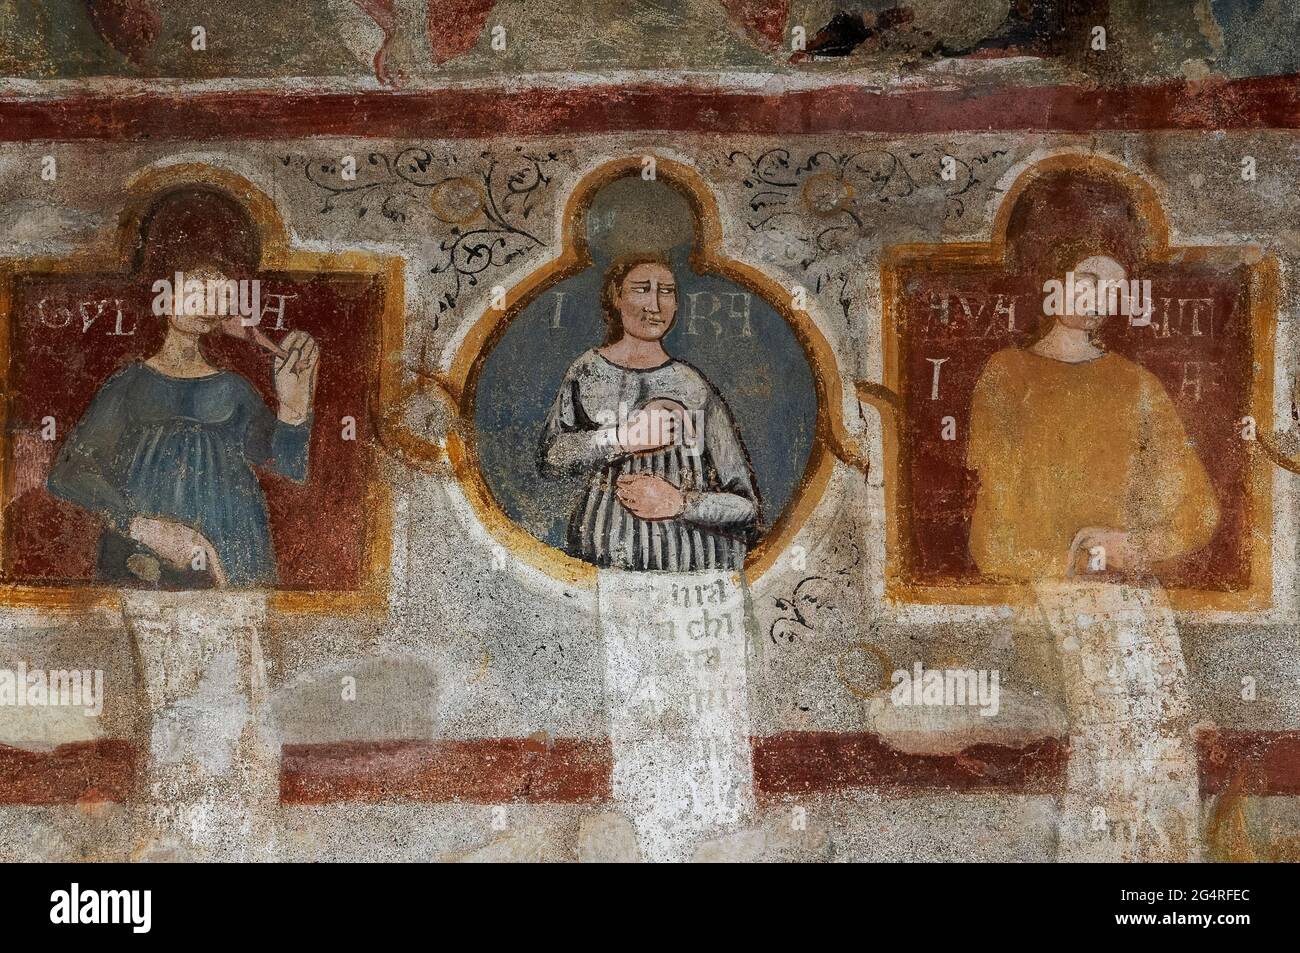 Gluttony, Wrath and Avarice: manicules (hands with pointing index fingers) indicate three of Christianity’s Seven Vices or Deadly Sins.  Part of an early 1300s Last Judgement fresco in the Chiesa di Santa Maria del Tiglio, beside Lake Como at Gravedona, Lombardy, Italy. Stock Photo